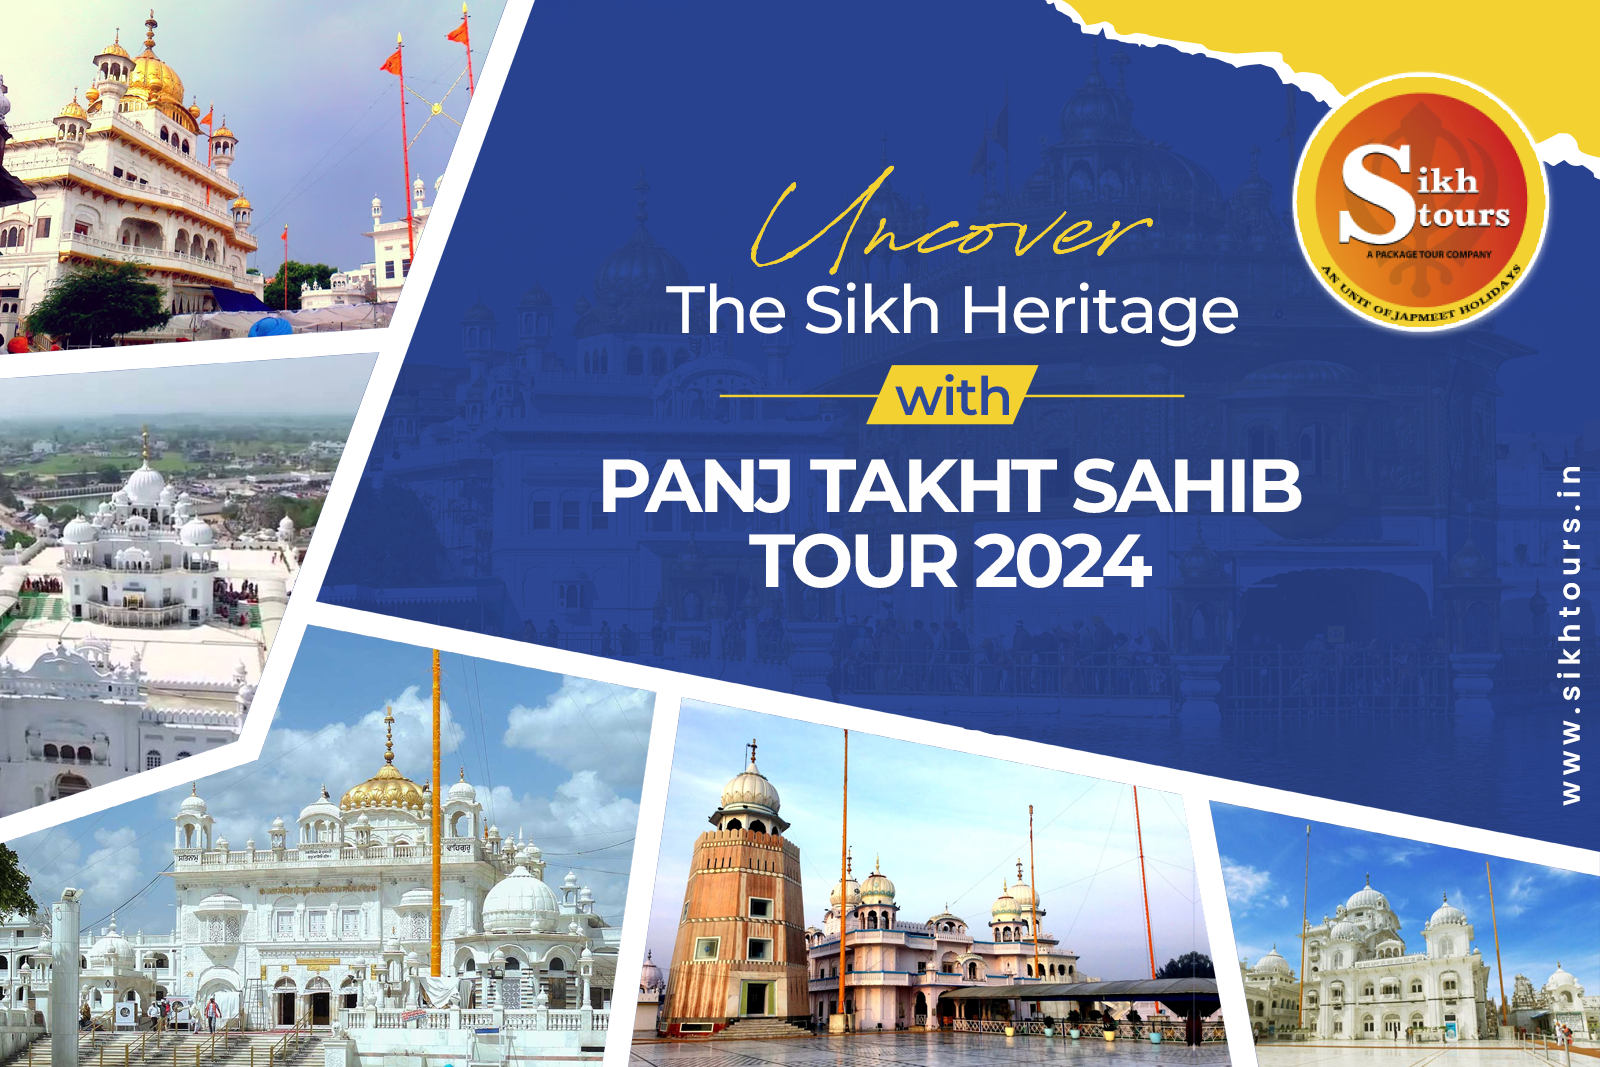 Uncover the Sikh Heritage with Panj Takht Sahib Tour 2024